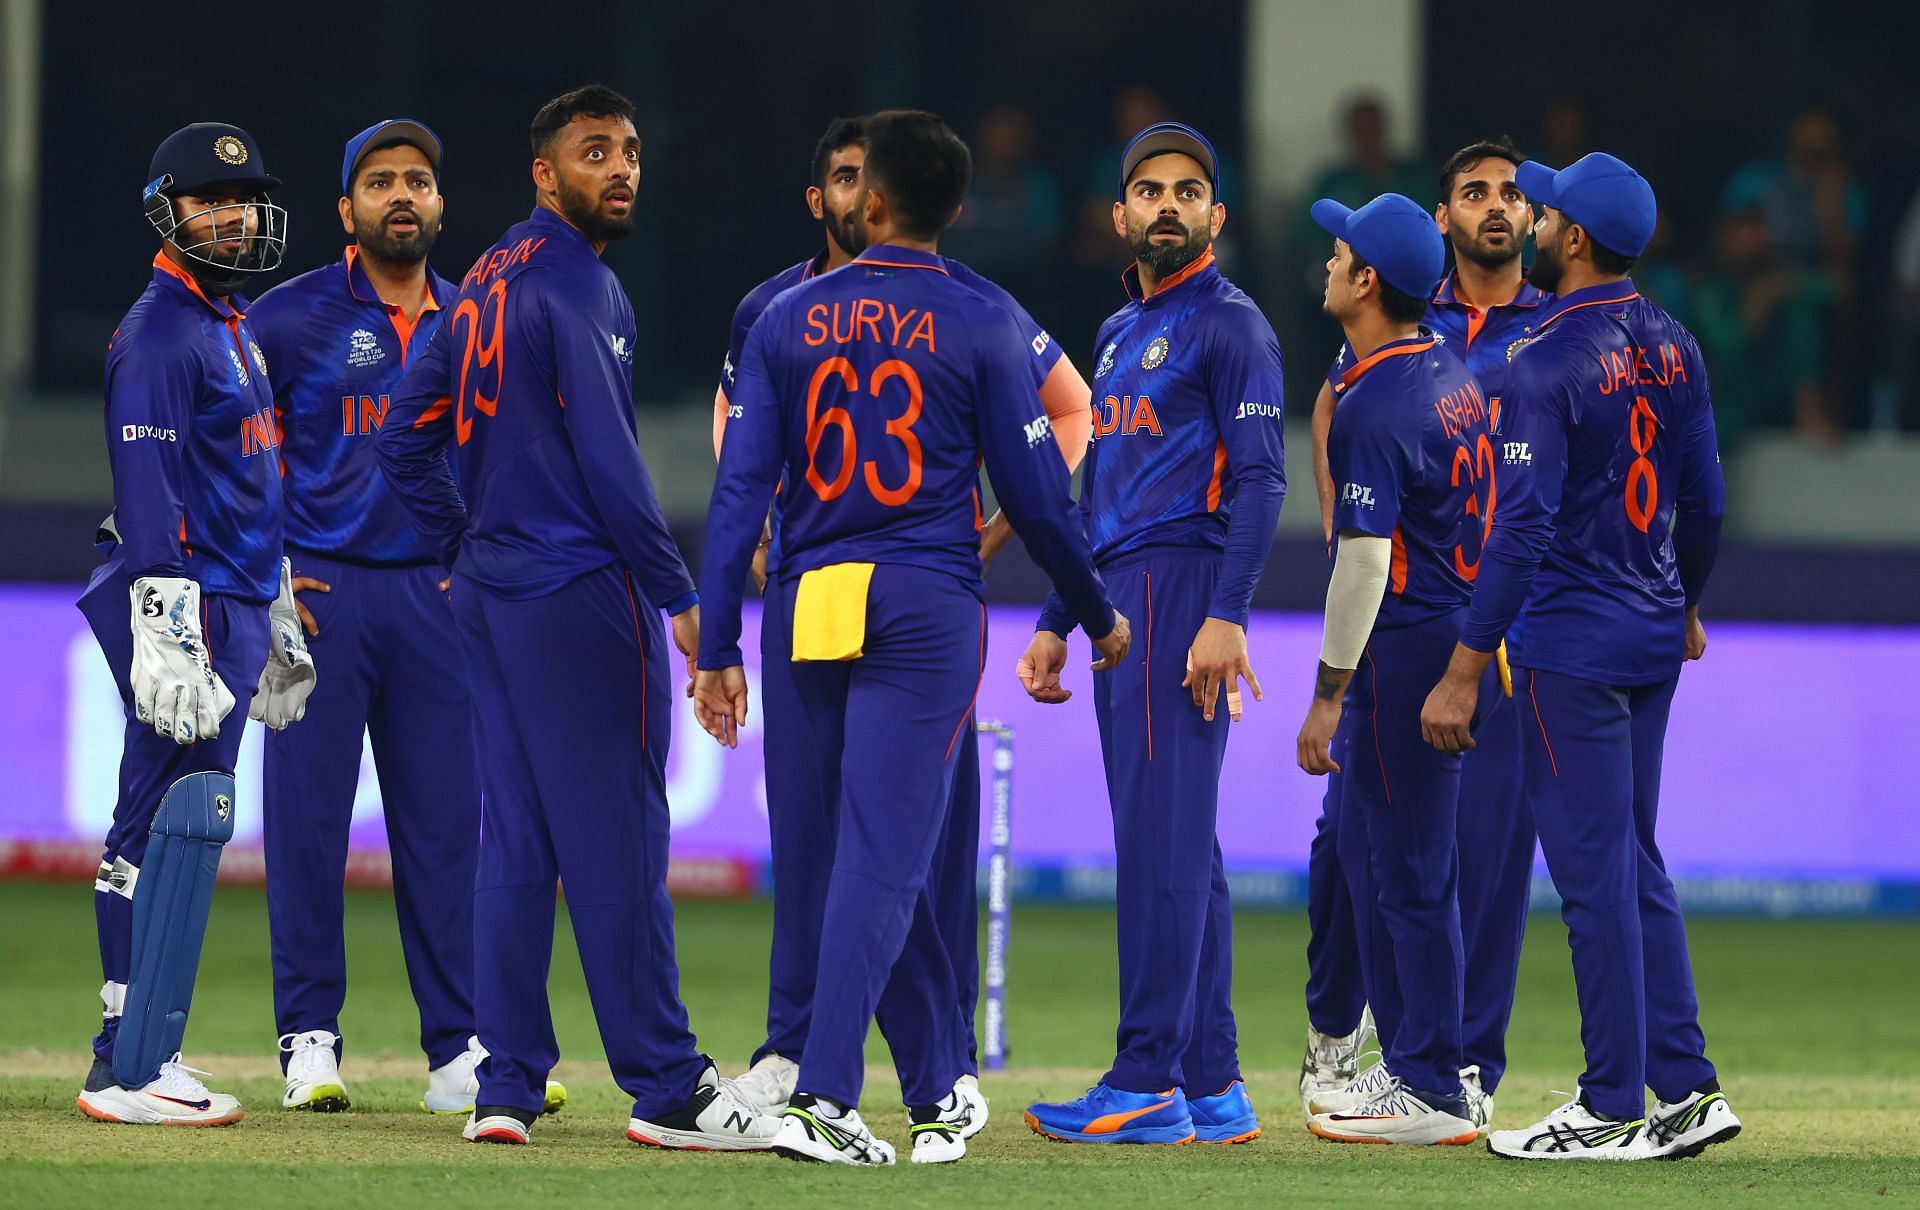 India were subjected to a 10-wicket defeat by Pakistan on Sunday